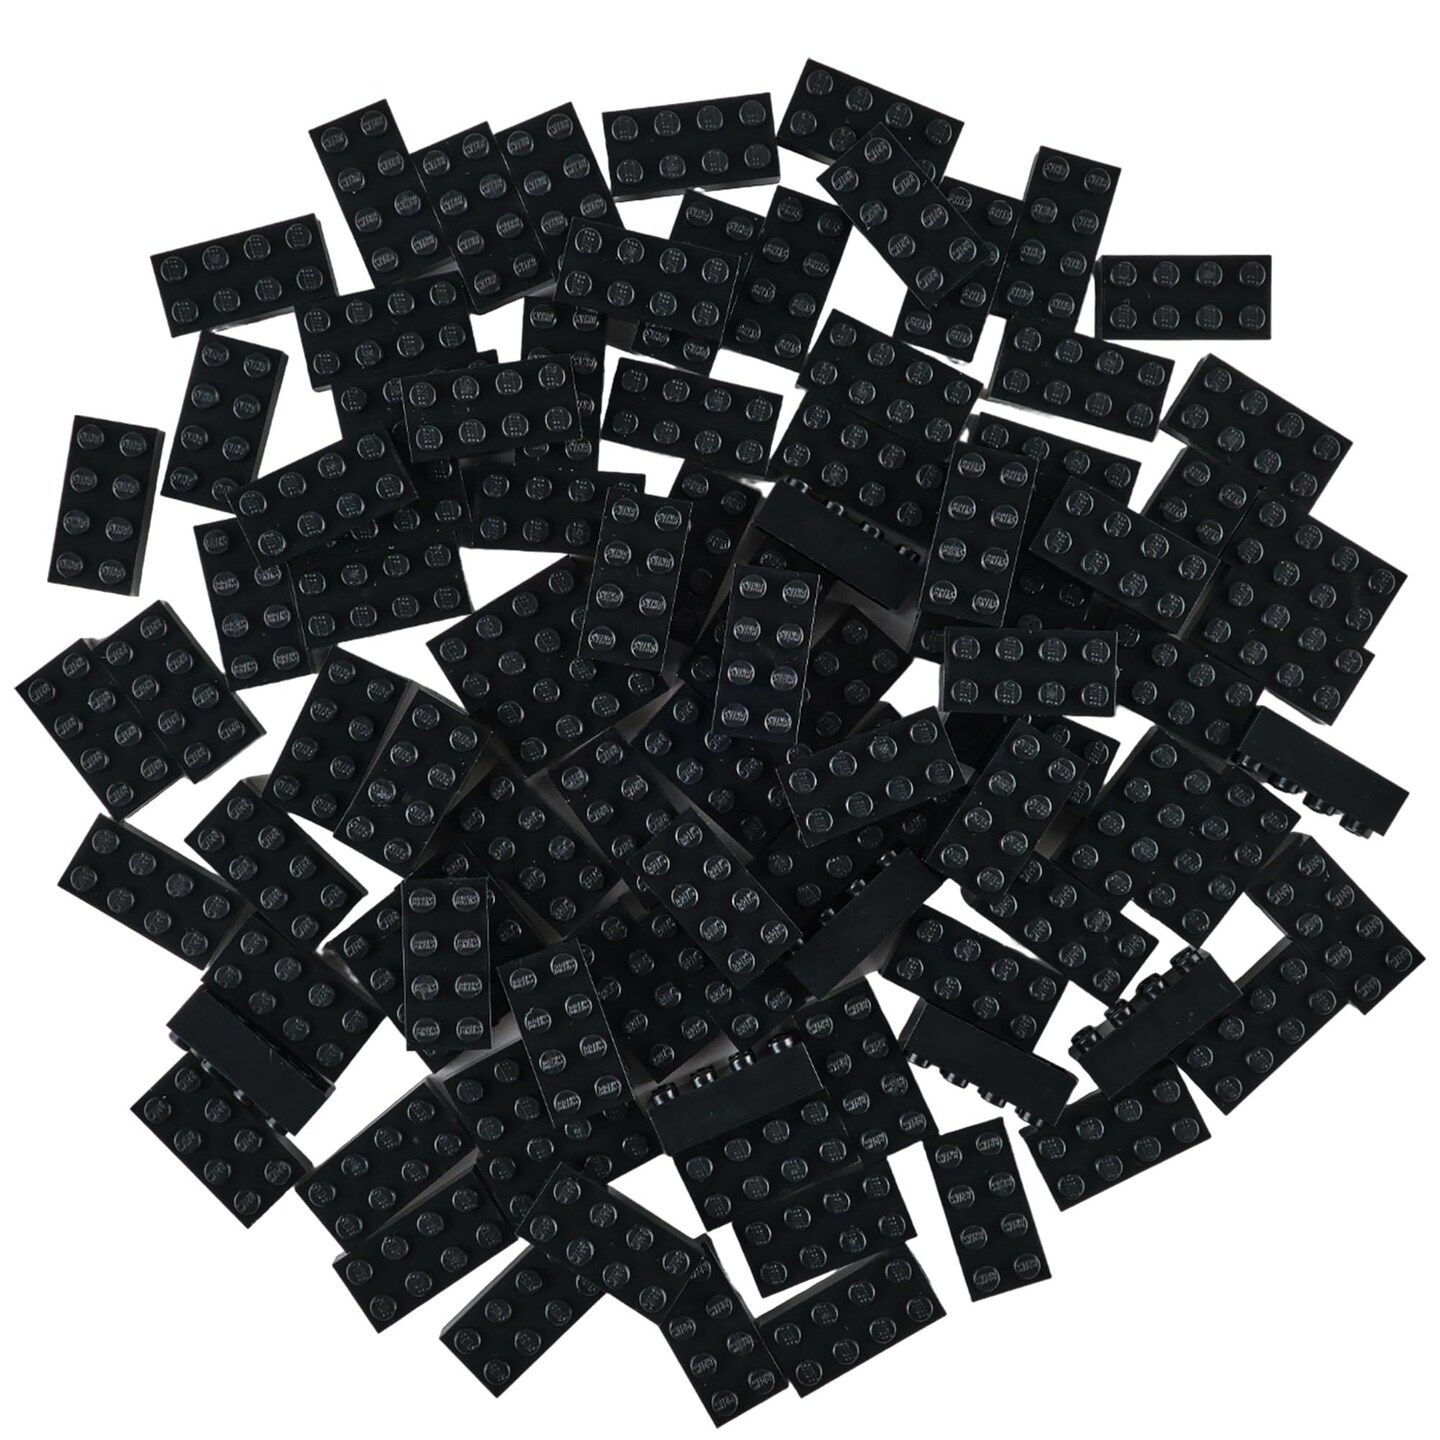 Strictly Briks Classic Bricks Starter Kit, Black, 96 Pieces, 2x4 Inches, Building Creative Play Set for Ages 3 and Up, 100% Compatible with All Major Brick Brands